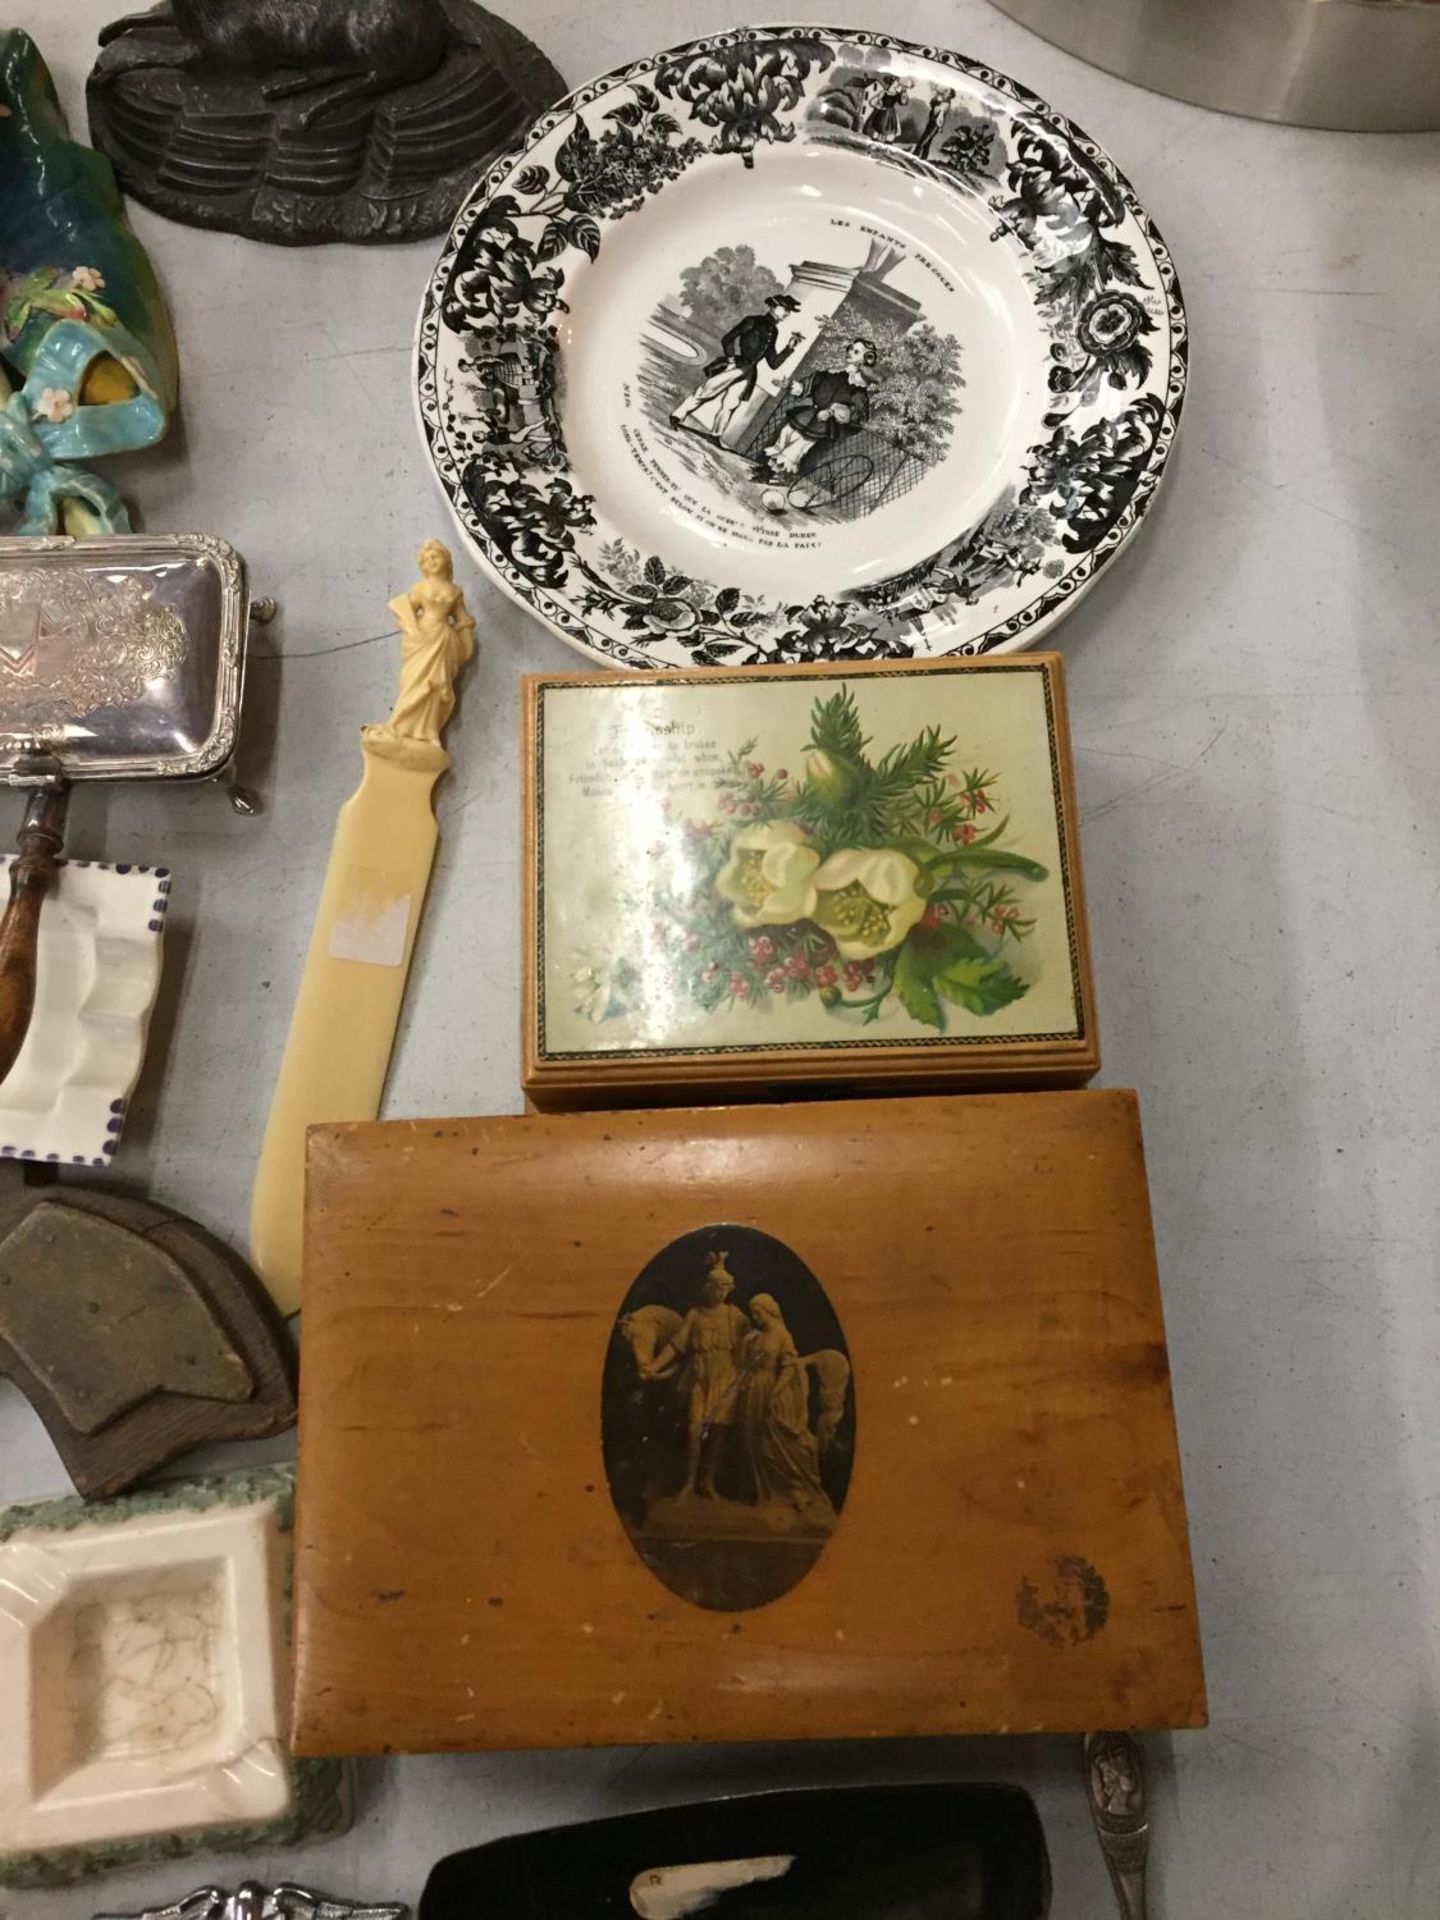 A MIXED COLLECTION OF ITEMS TO INCLUDE TWO SMALL BOXES, ASHTRAYS, A WALL PLAQUE, LETTER OPENERS ETC - Image 5 of 5